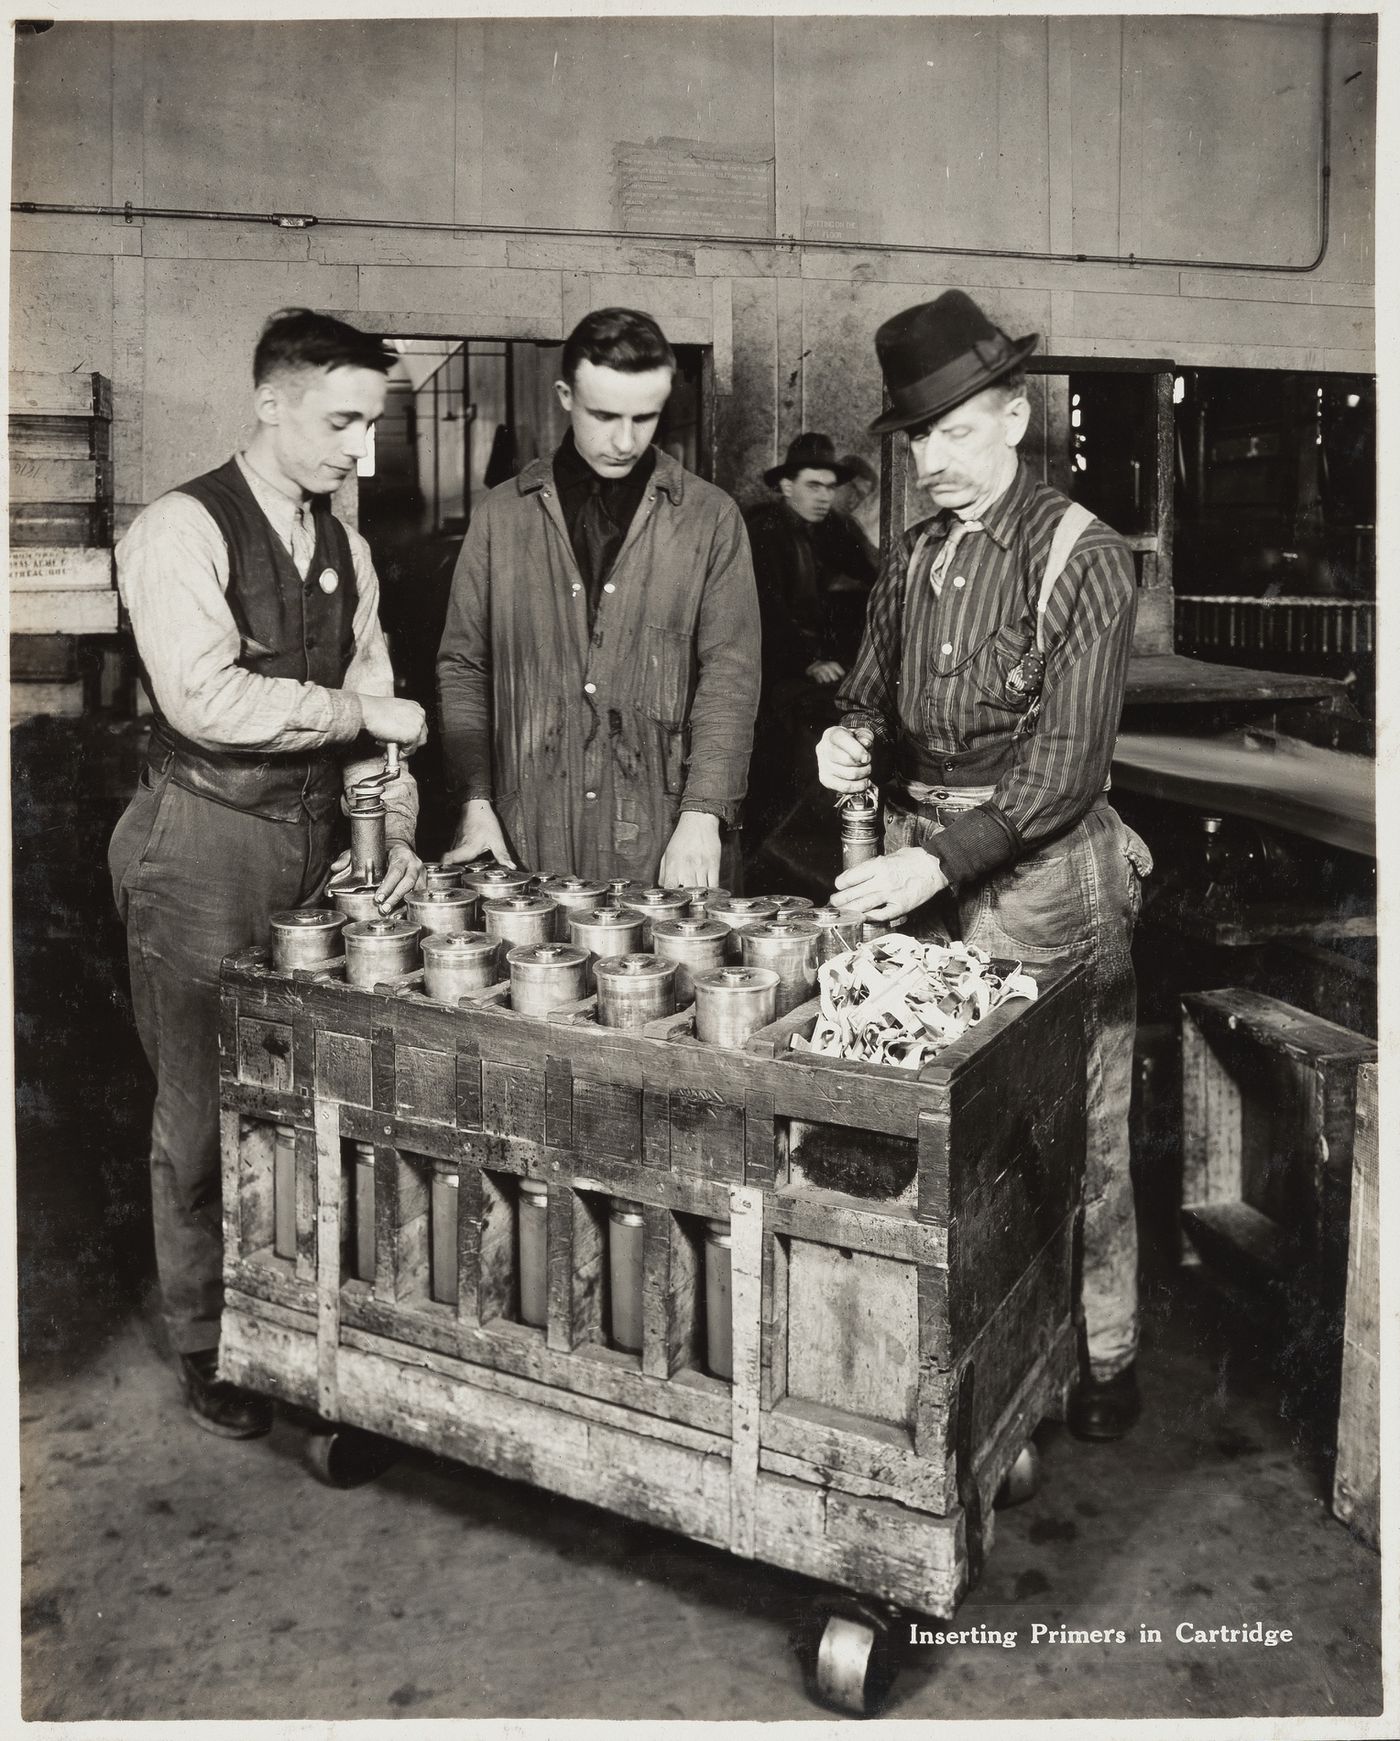 Interior view of workers inserting primers in cartridge at the Energite Explosives Plant No. 3, the Shell Loading Plant, Renfrew, Ontario, Canada